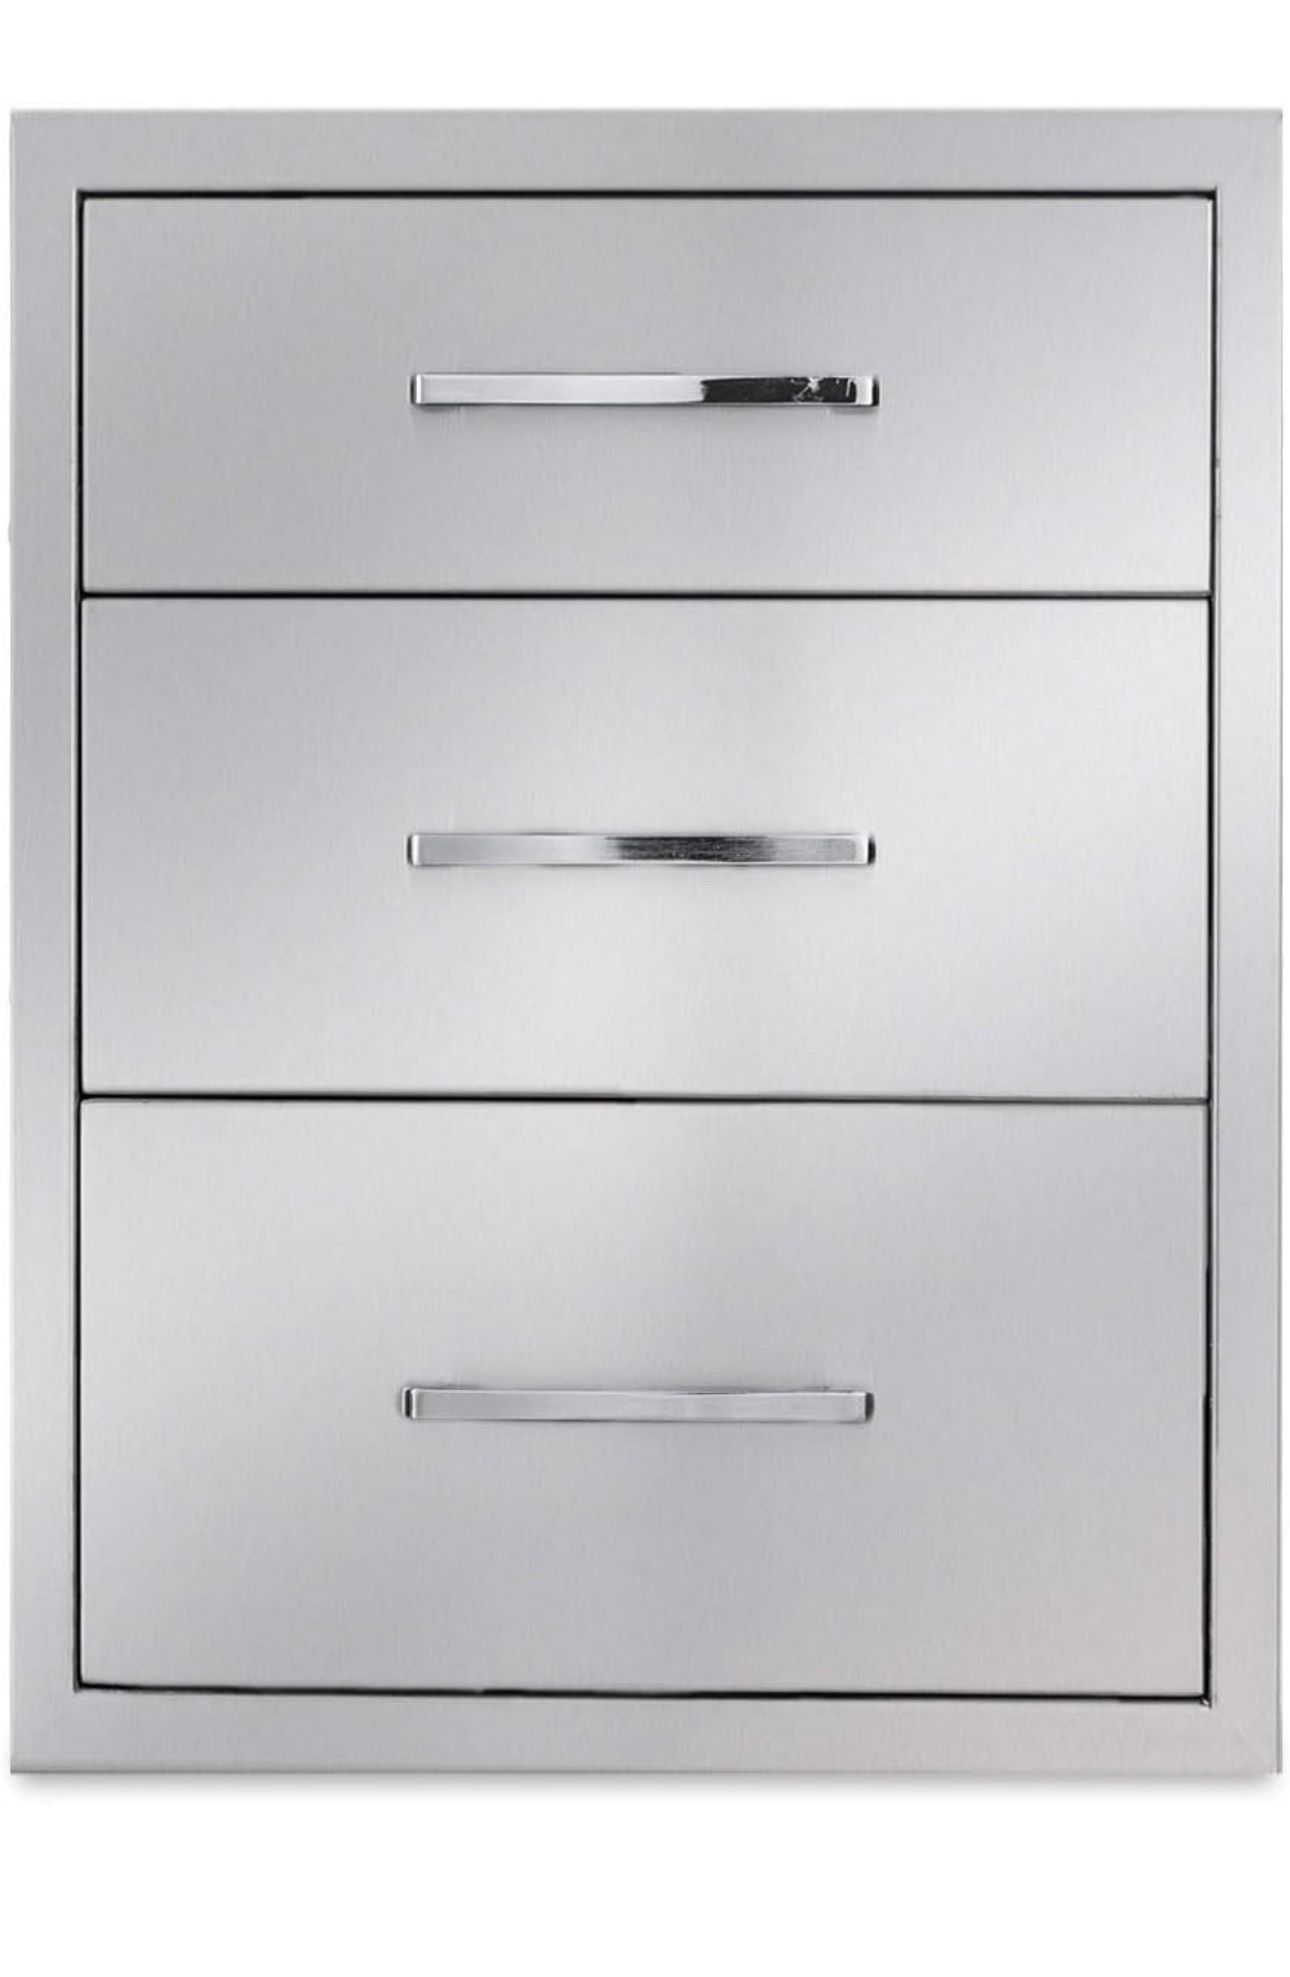 Outdoor Kitchen Drawers Stainless Steel 3-Drawer BBQ Drawer 16" W x 21" H x 23" D Enclosed Built-in Drawer Flush Mount for Outdoor Kitchens & BBQ Isla